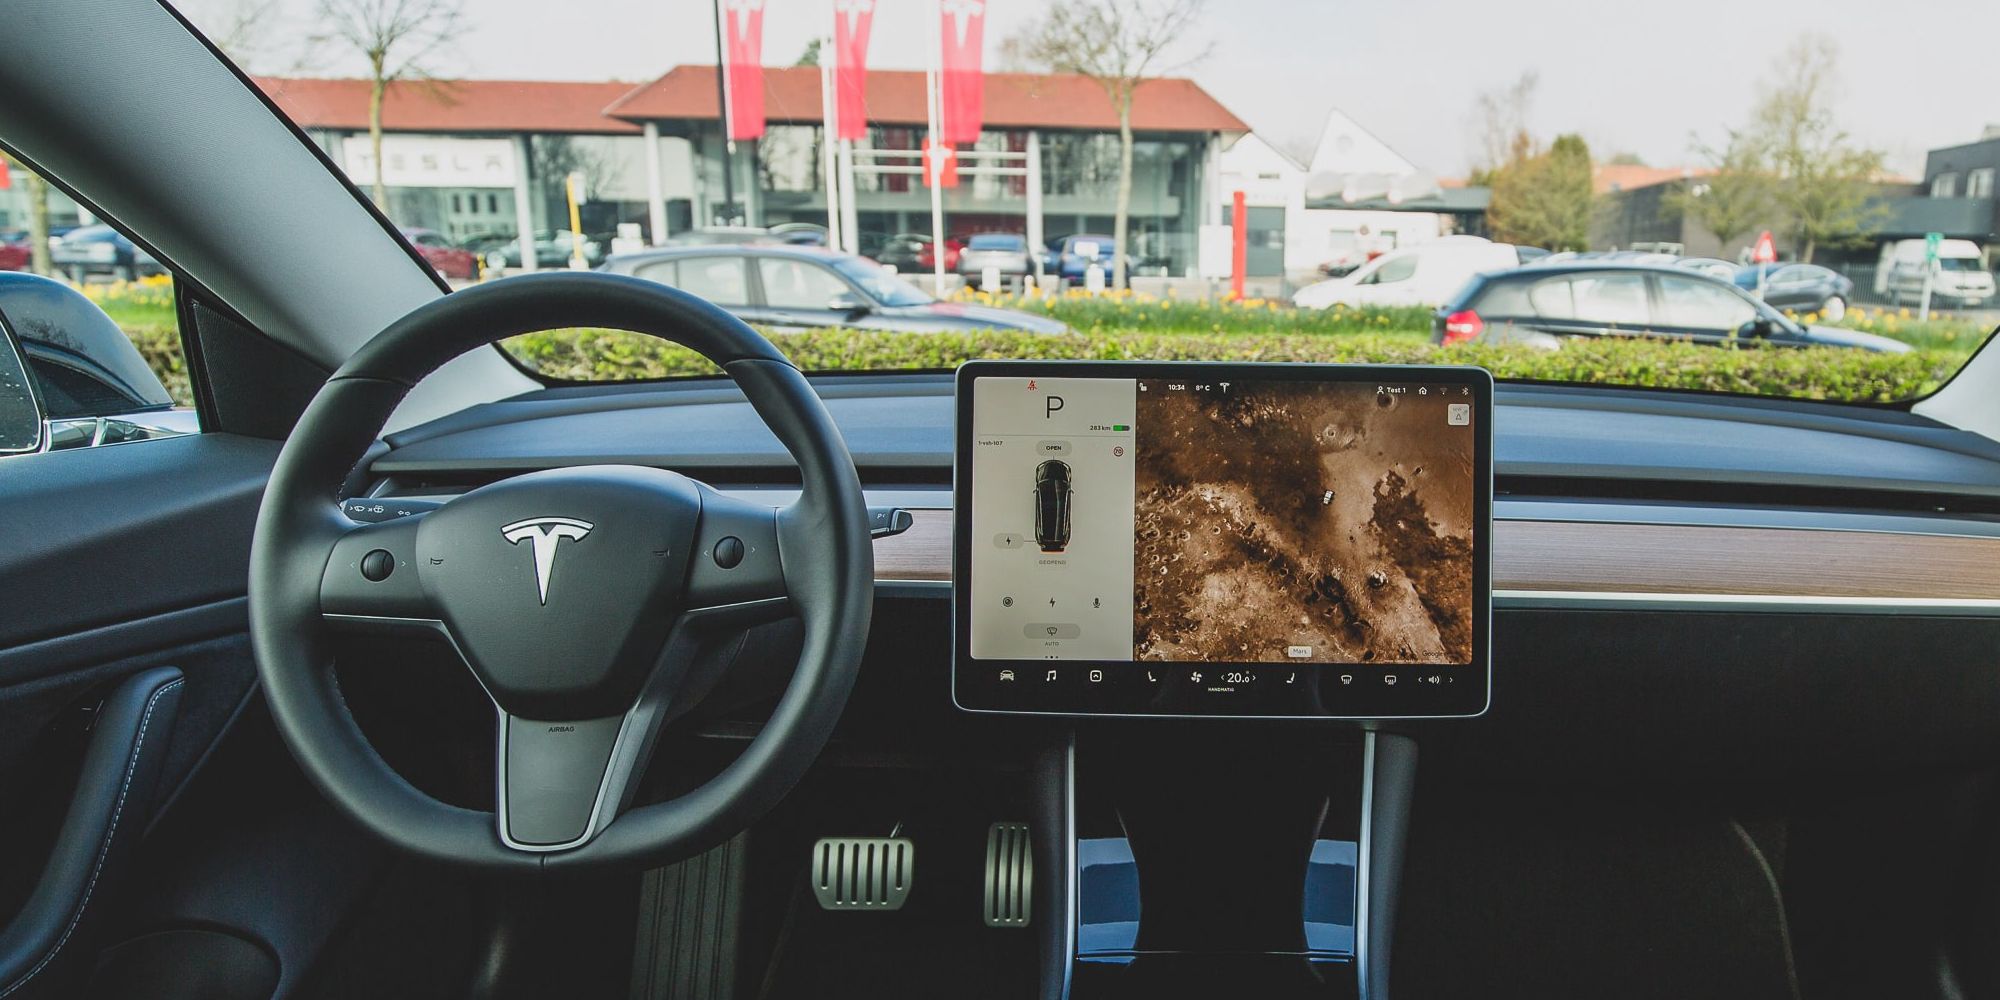 The interior of the Tesla Model 3